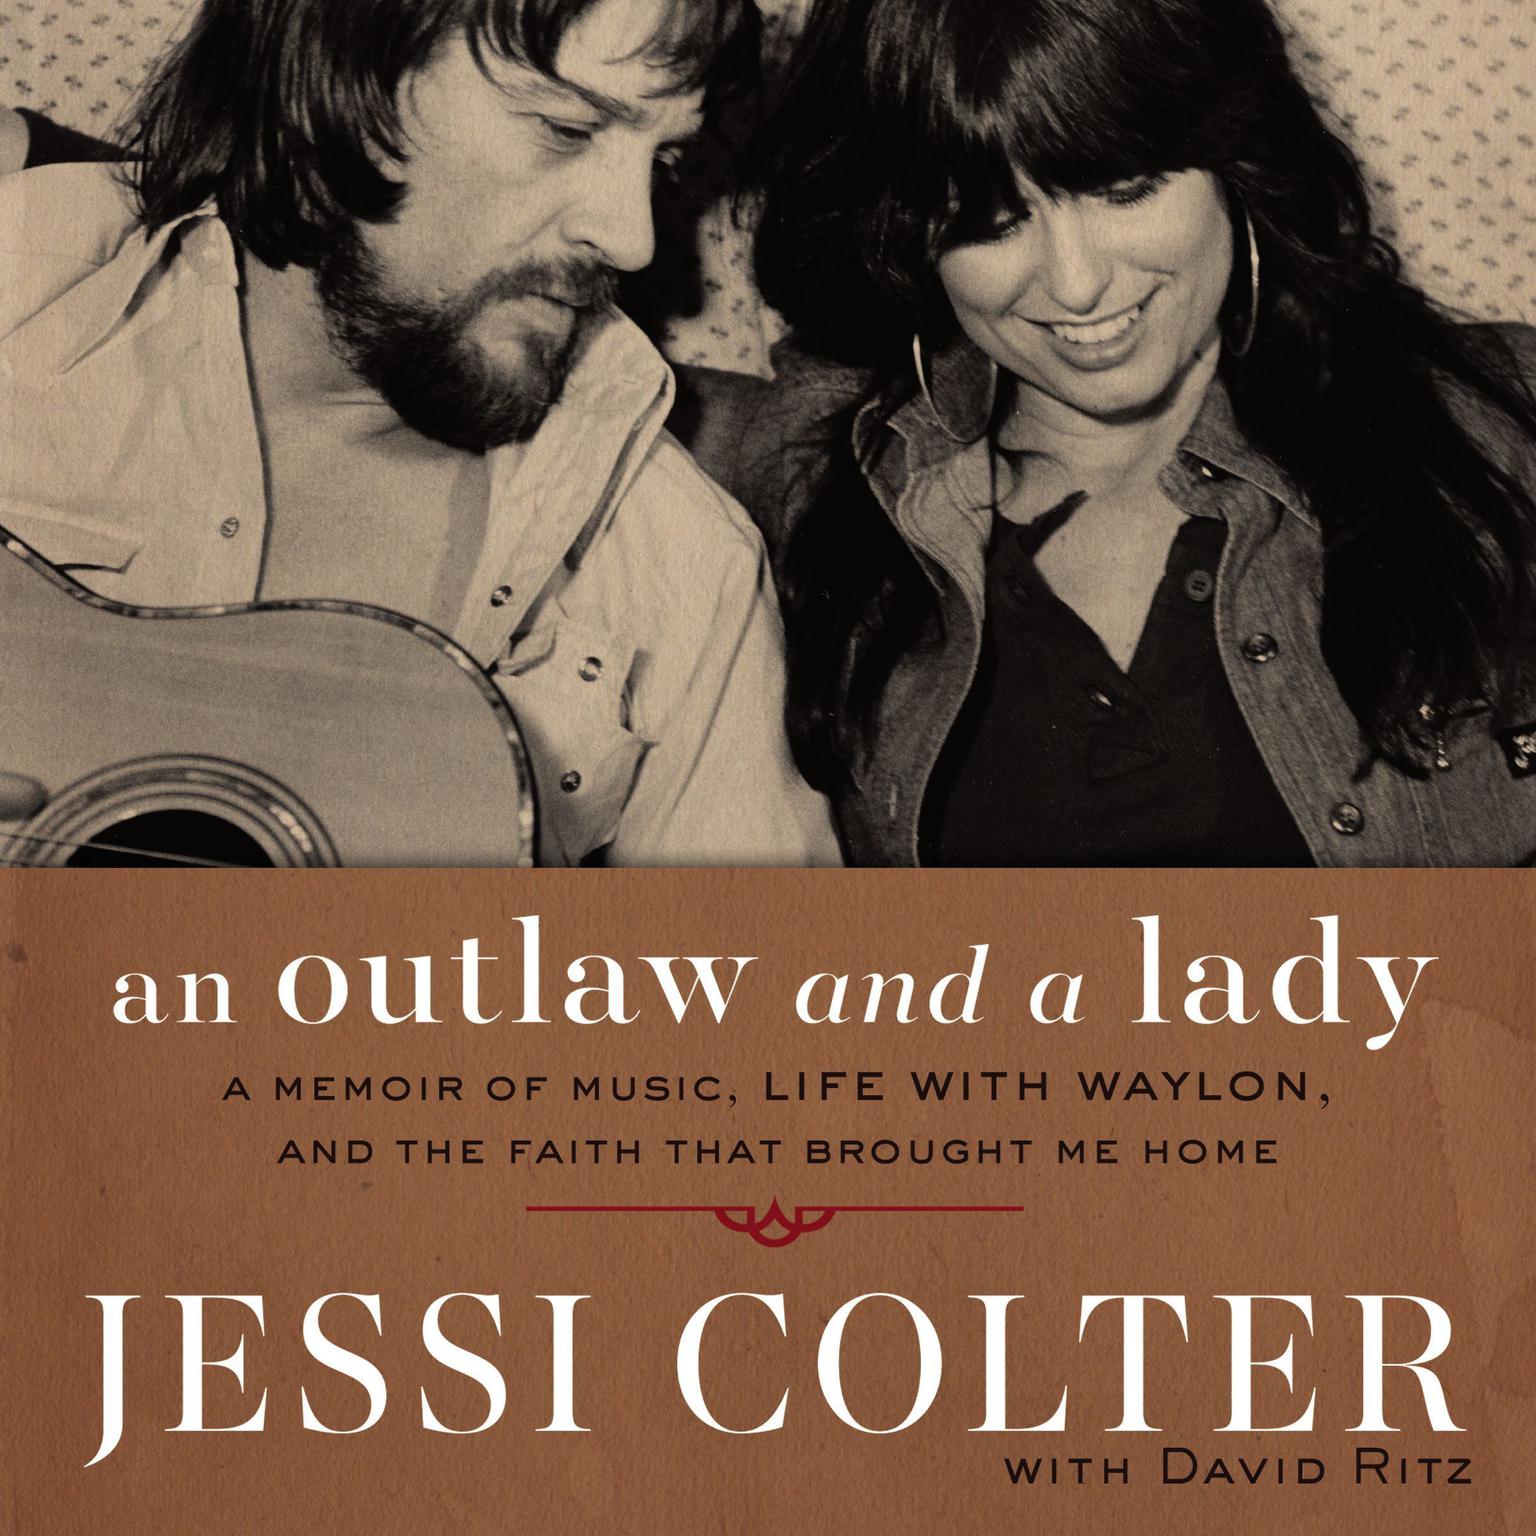 An Outlaw and a Lady: A Memoir of Music, Life with Waylon, and the Faith that Brought Me Home Audiobook, by Jessi Colter